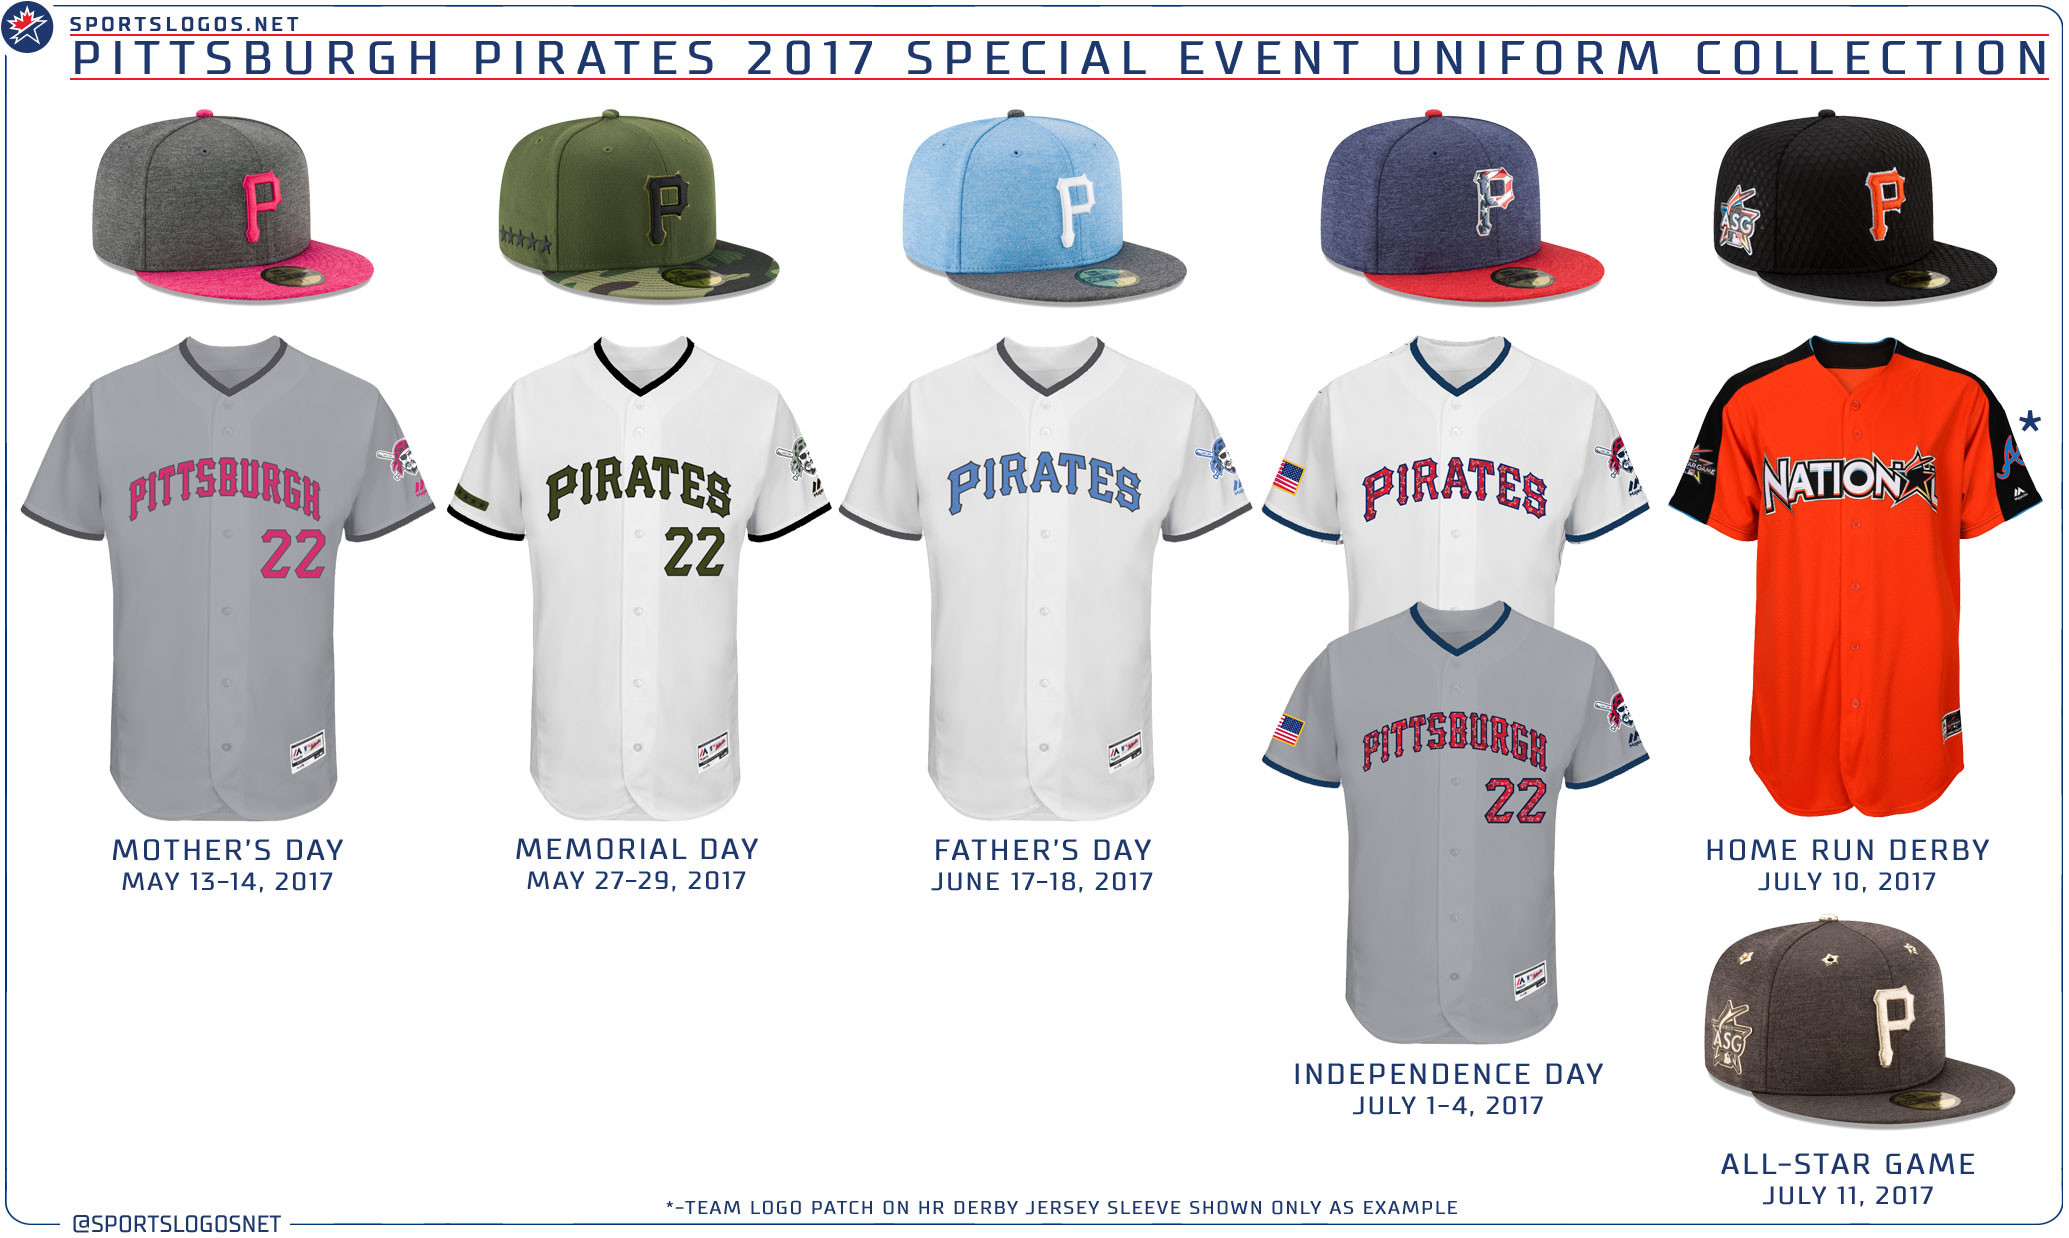 2069x1238 The Pirates wil have five additional looks during regular-season games. (MLB /@sportslogosnet)